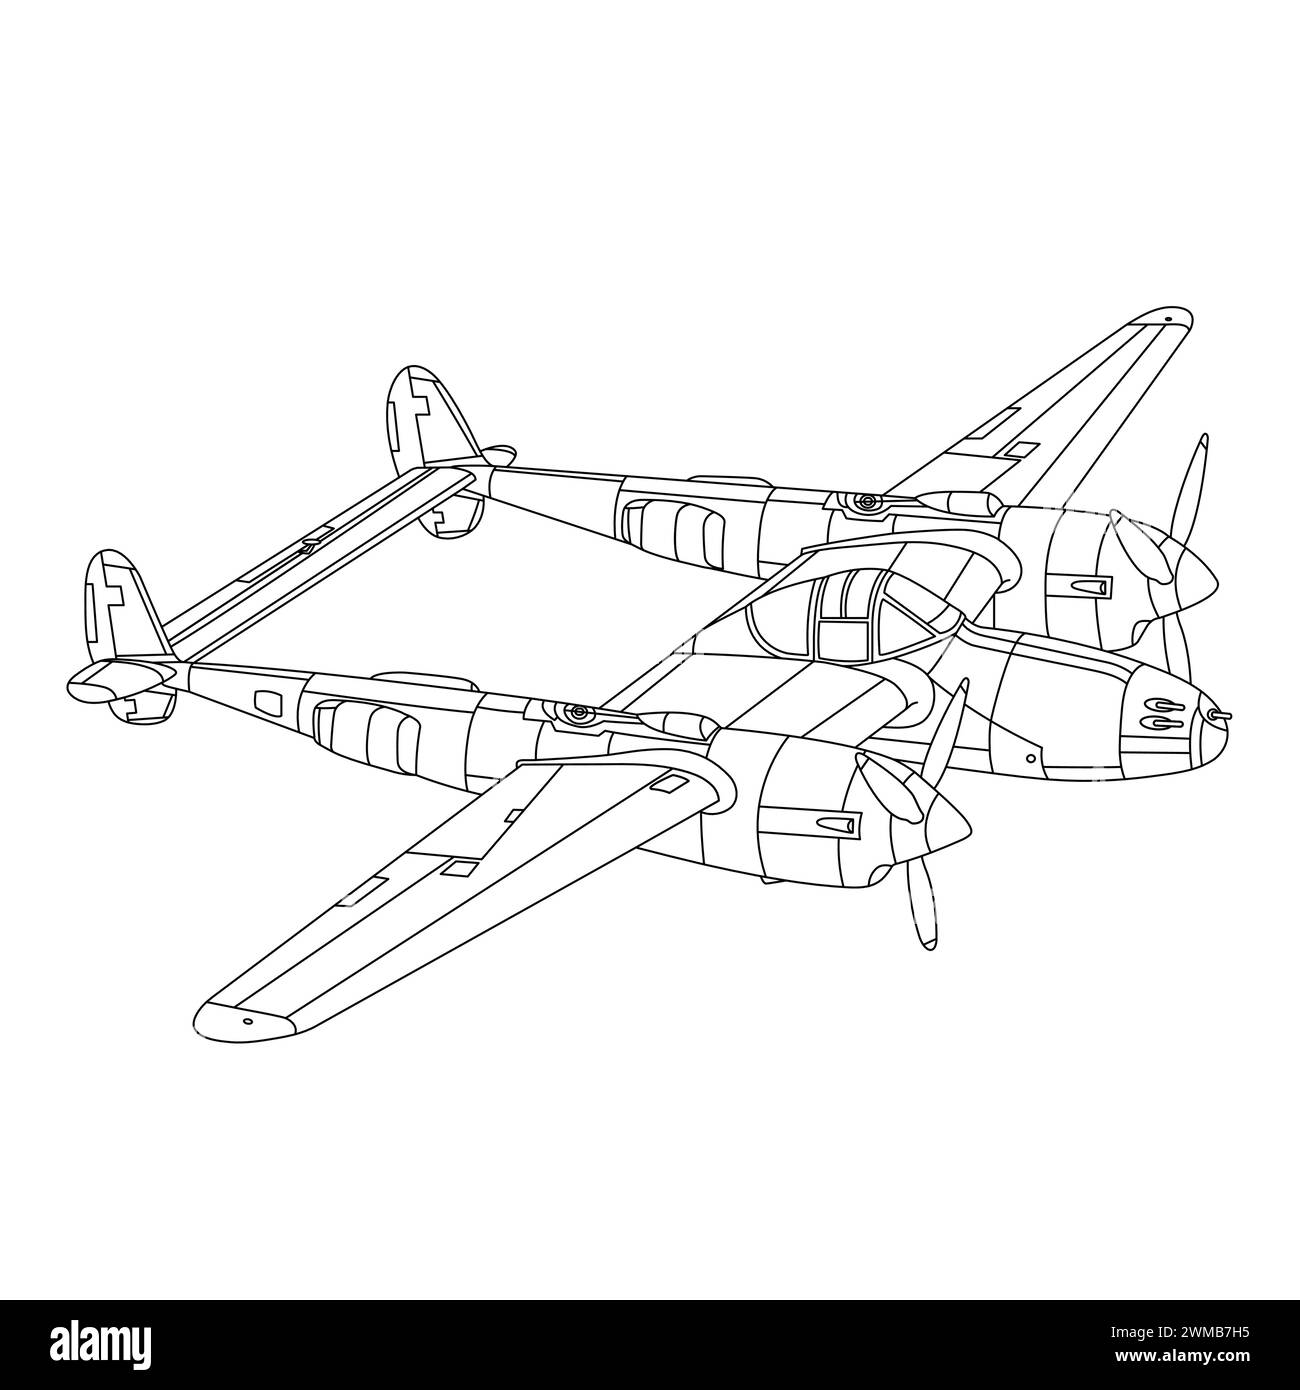 Lockheed P-38 Lightning Aircraft War World II Fighter Coloring Page. Military Airplane Vector Illustration. Vintage War Plane. Cartoon Airplane Stock Vector